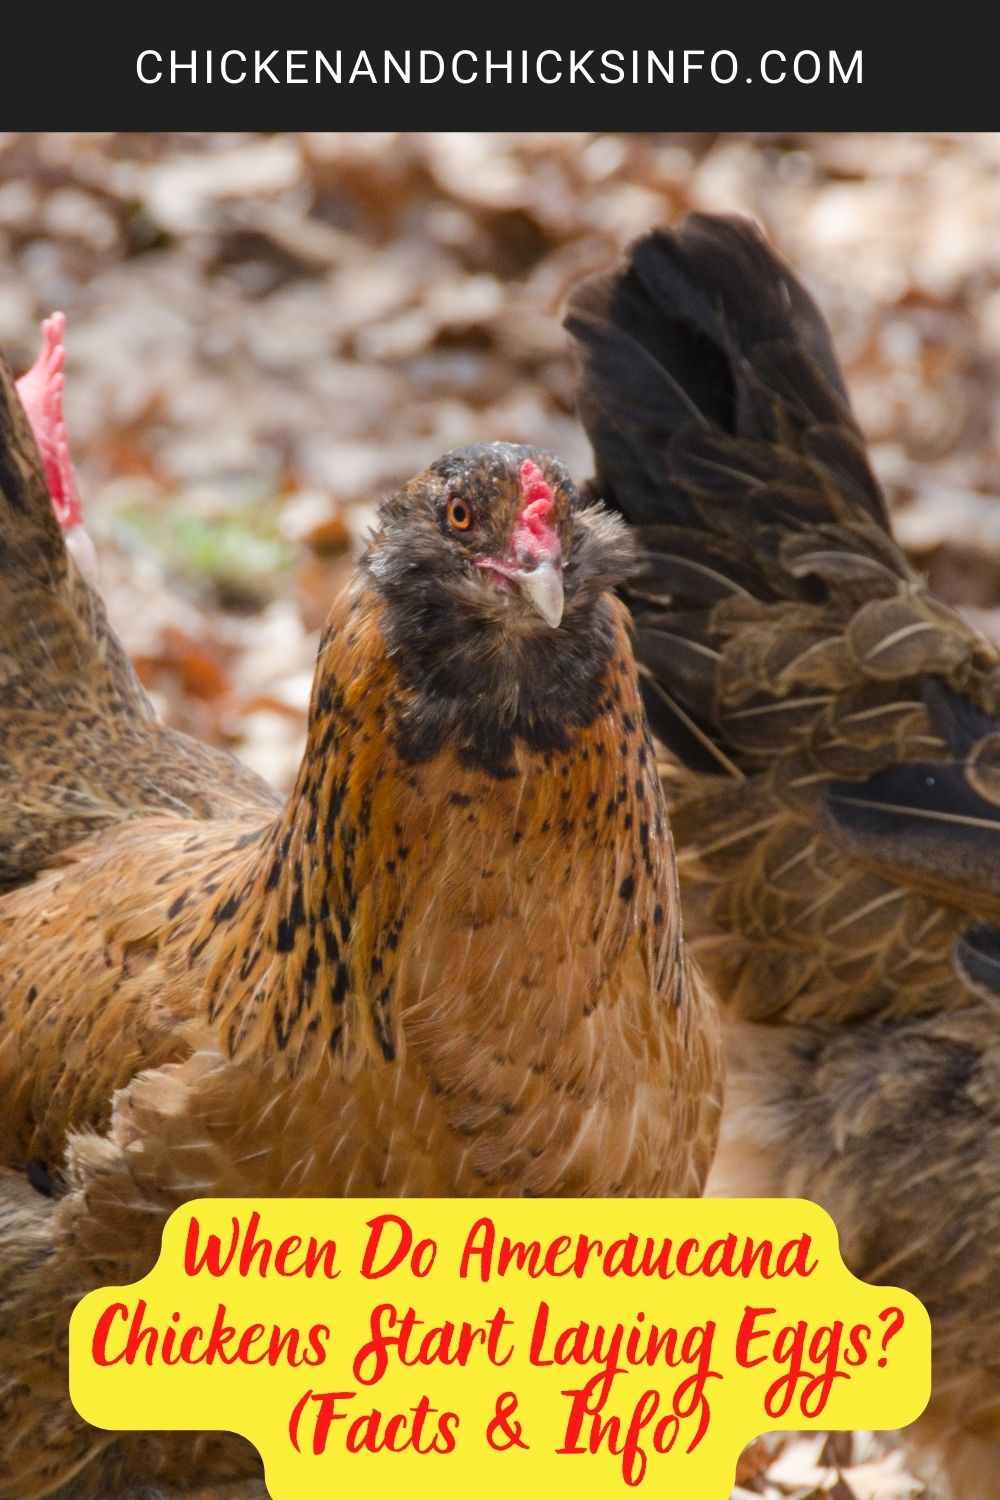 When Do Ameraucana Chickens Start Laying Eggs (Facts & Info) poster.
